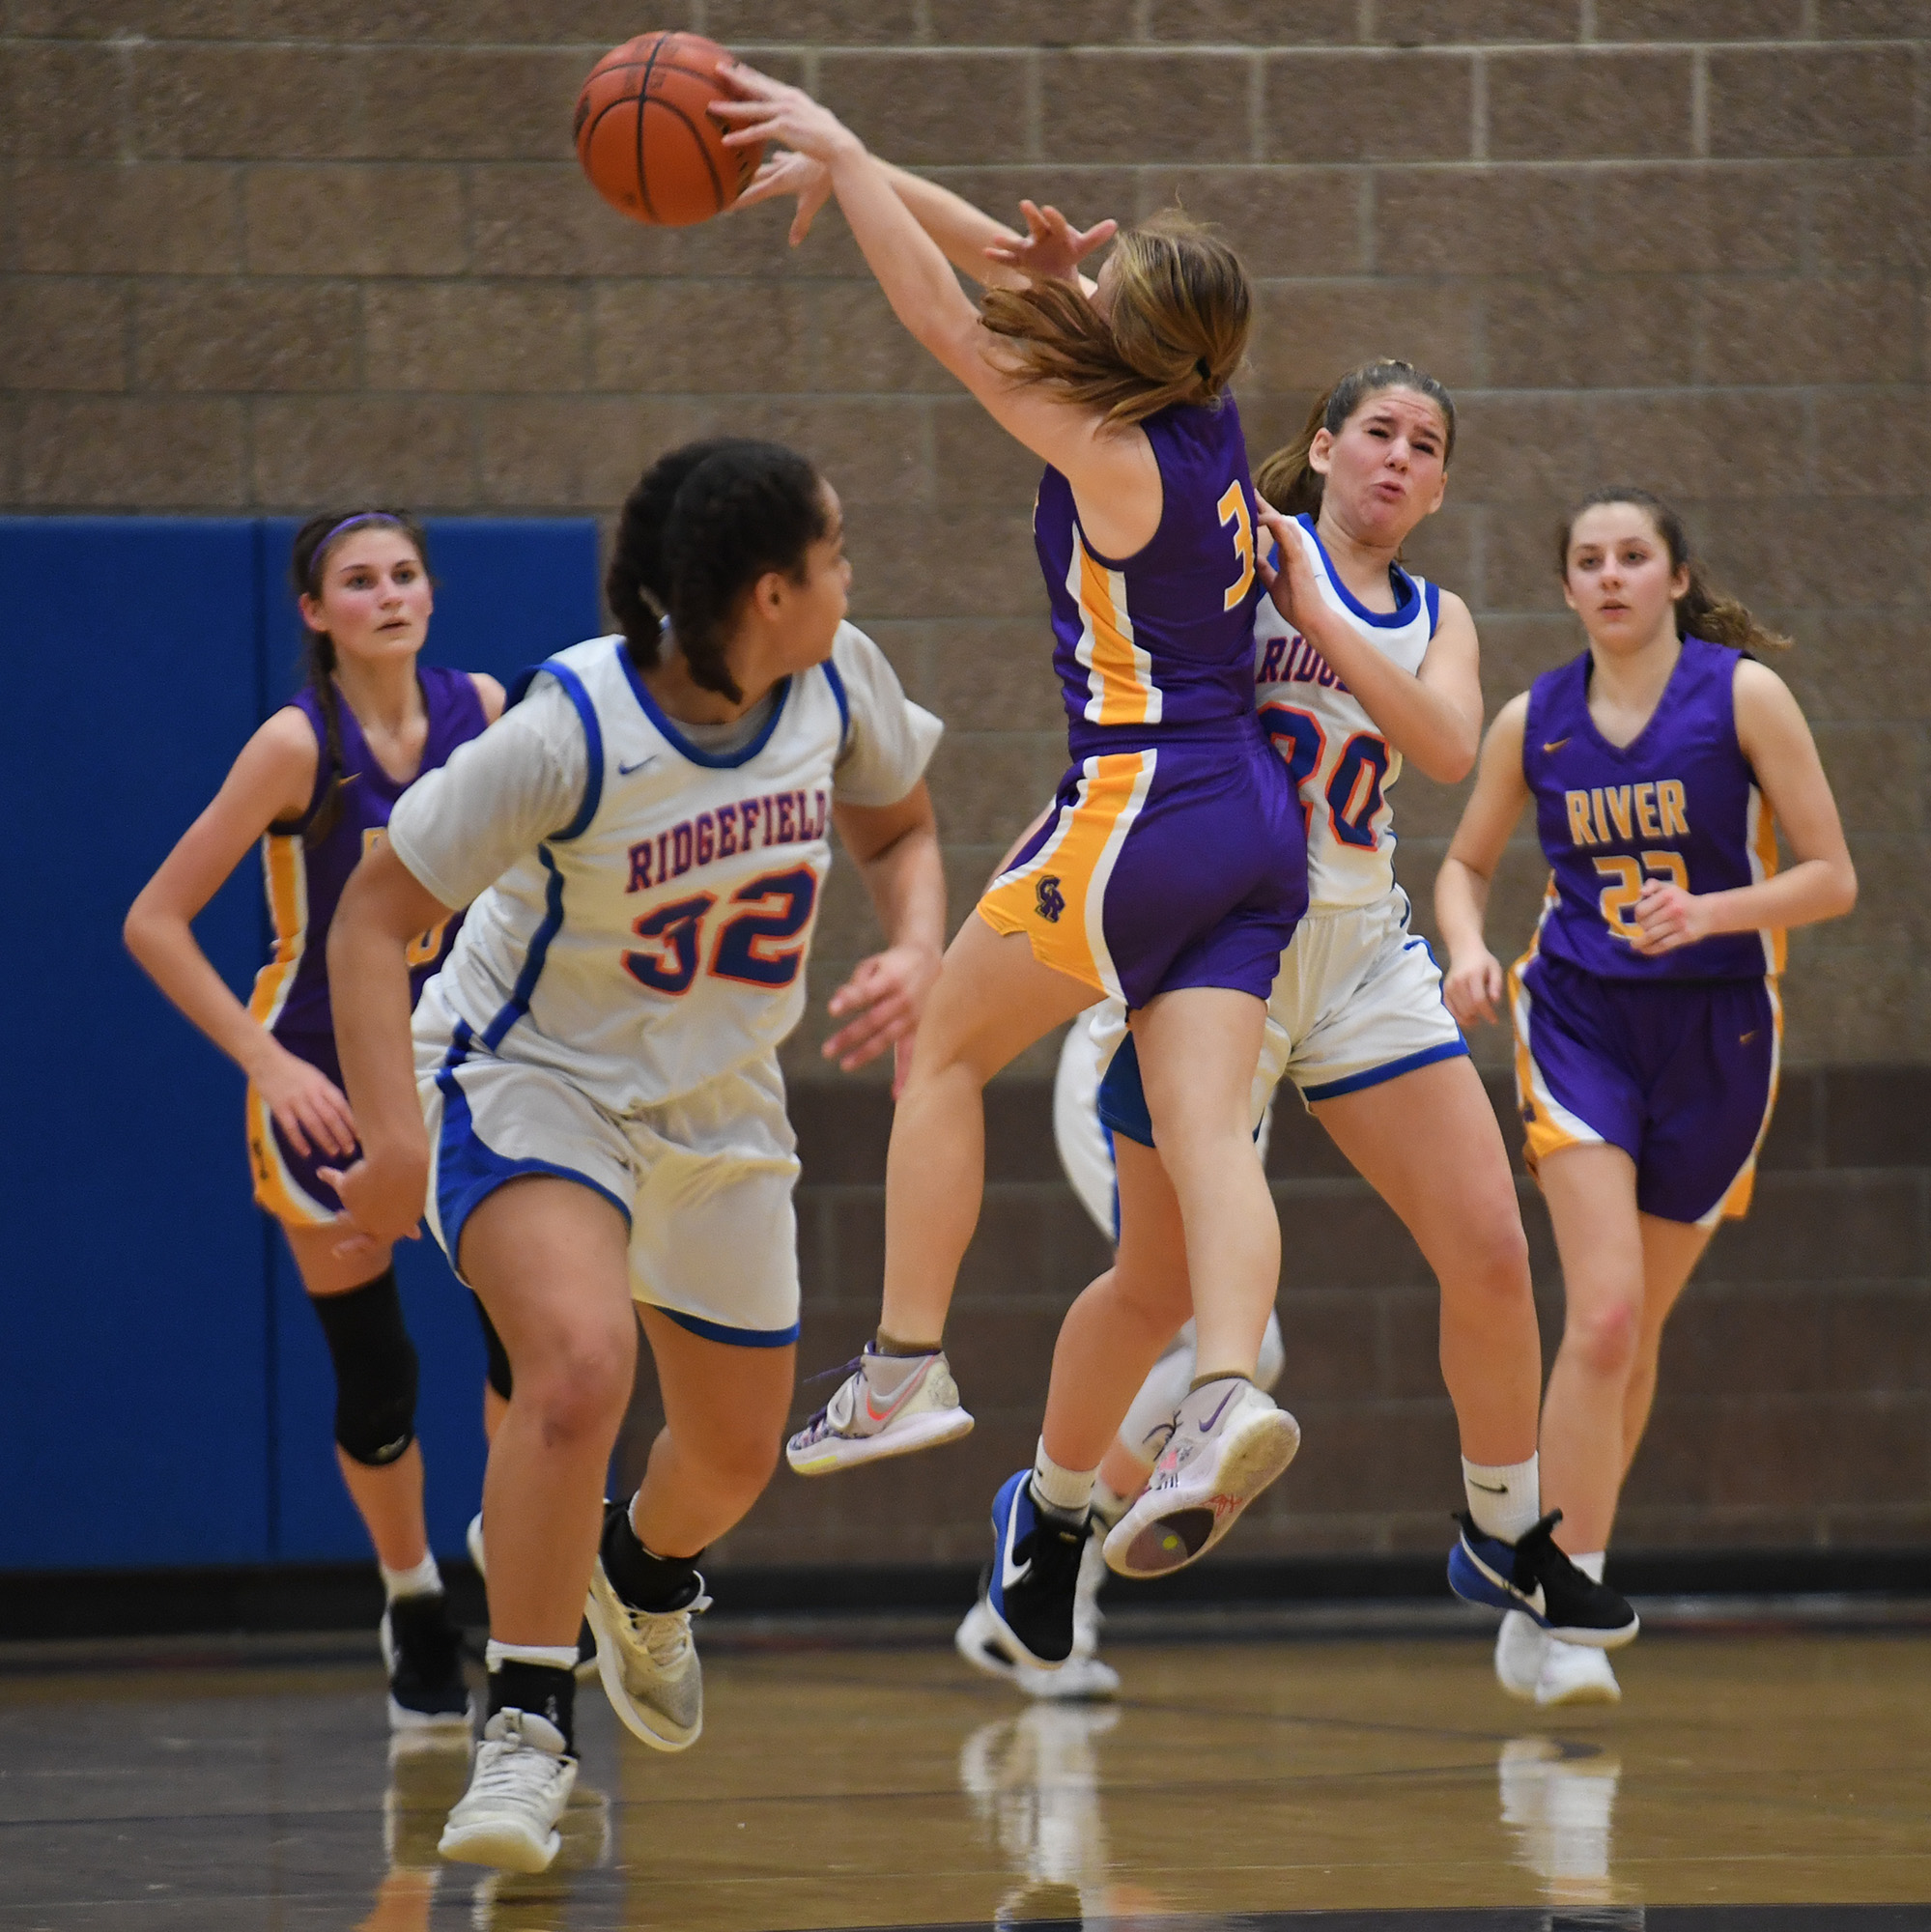 Columbia River sophomore Marley Myers,  shown here in January center, blocks a pass from Ridgefield sophomore Nora Martin.